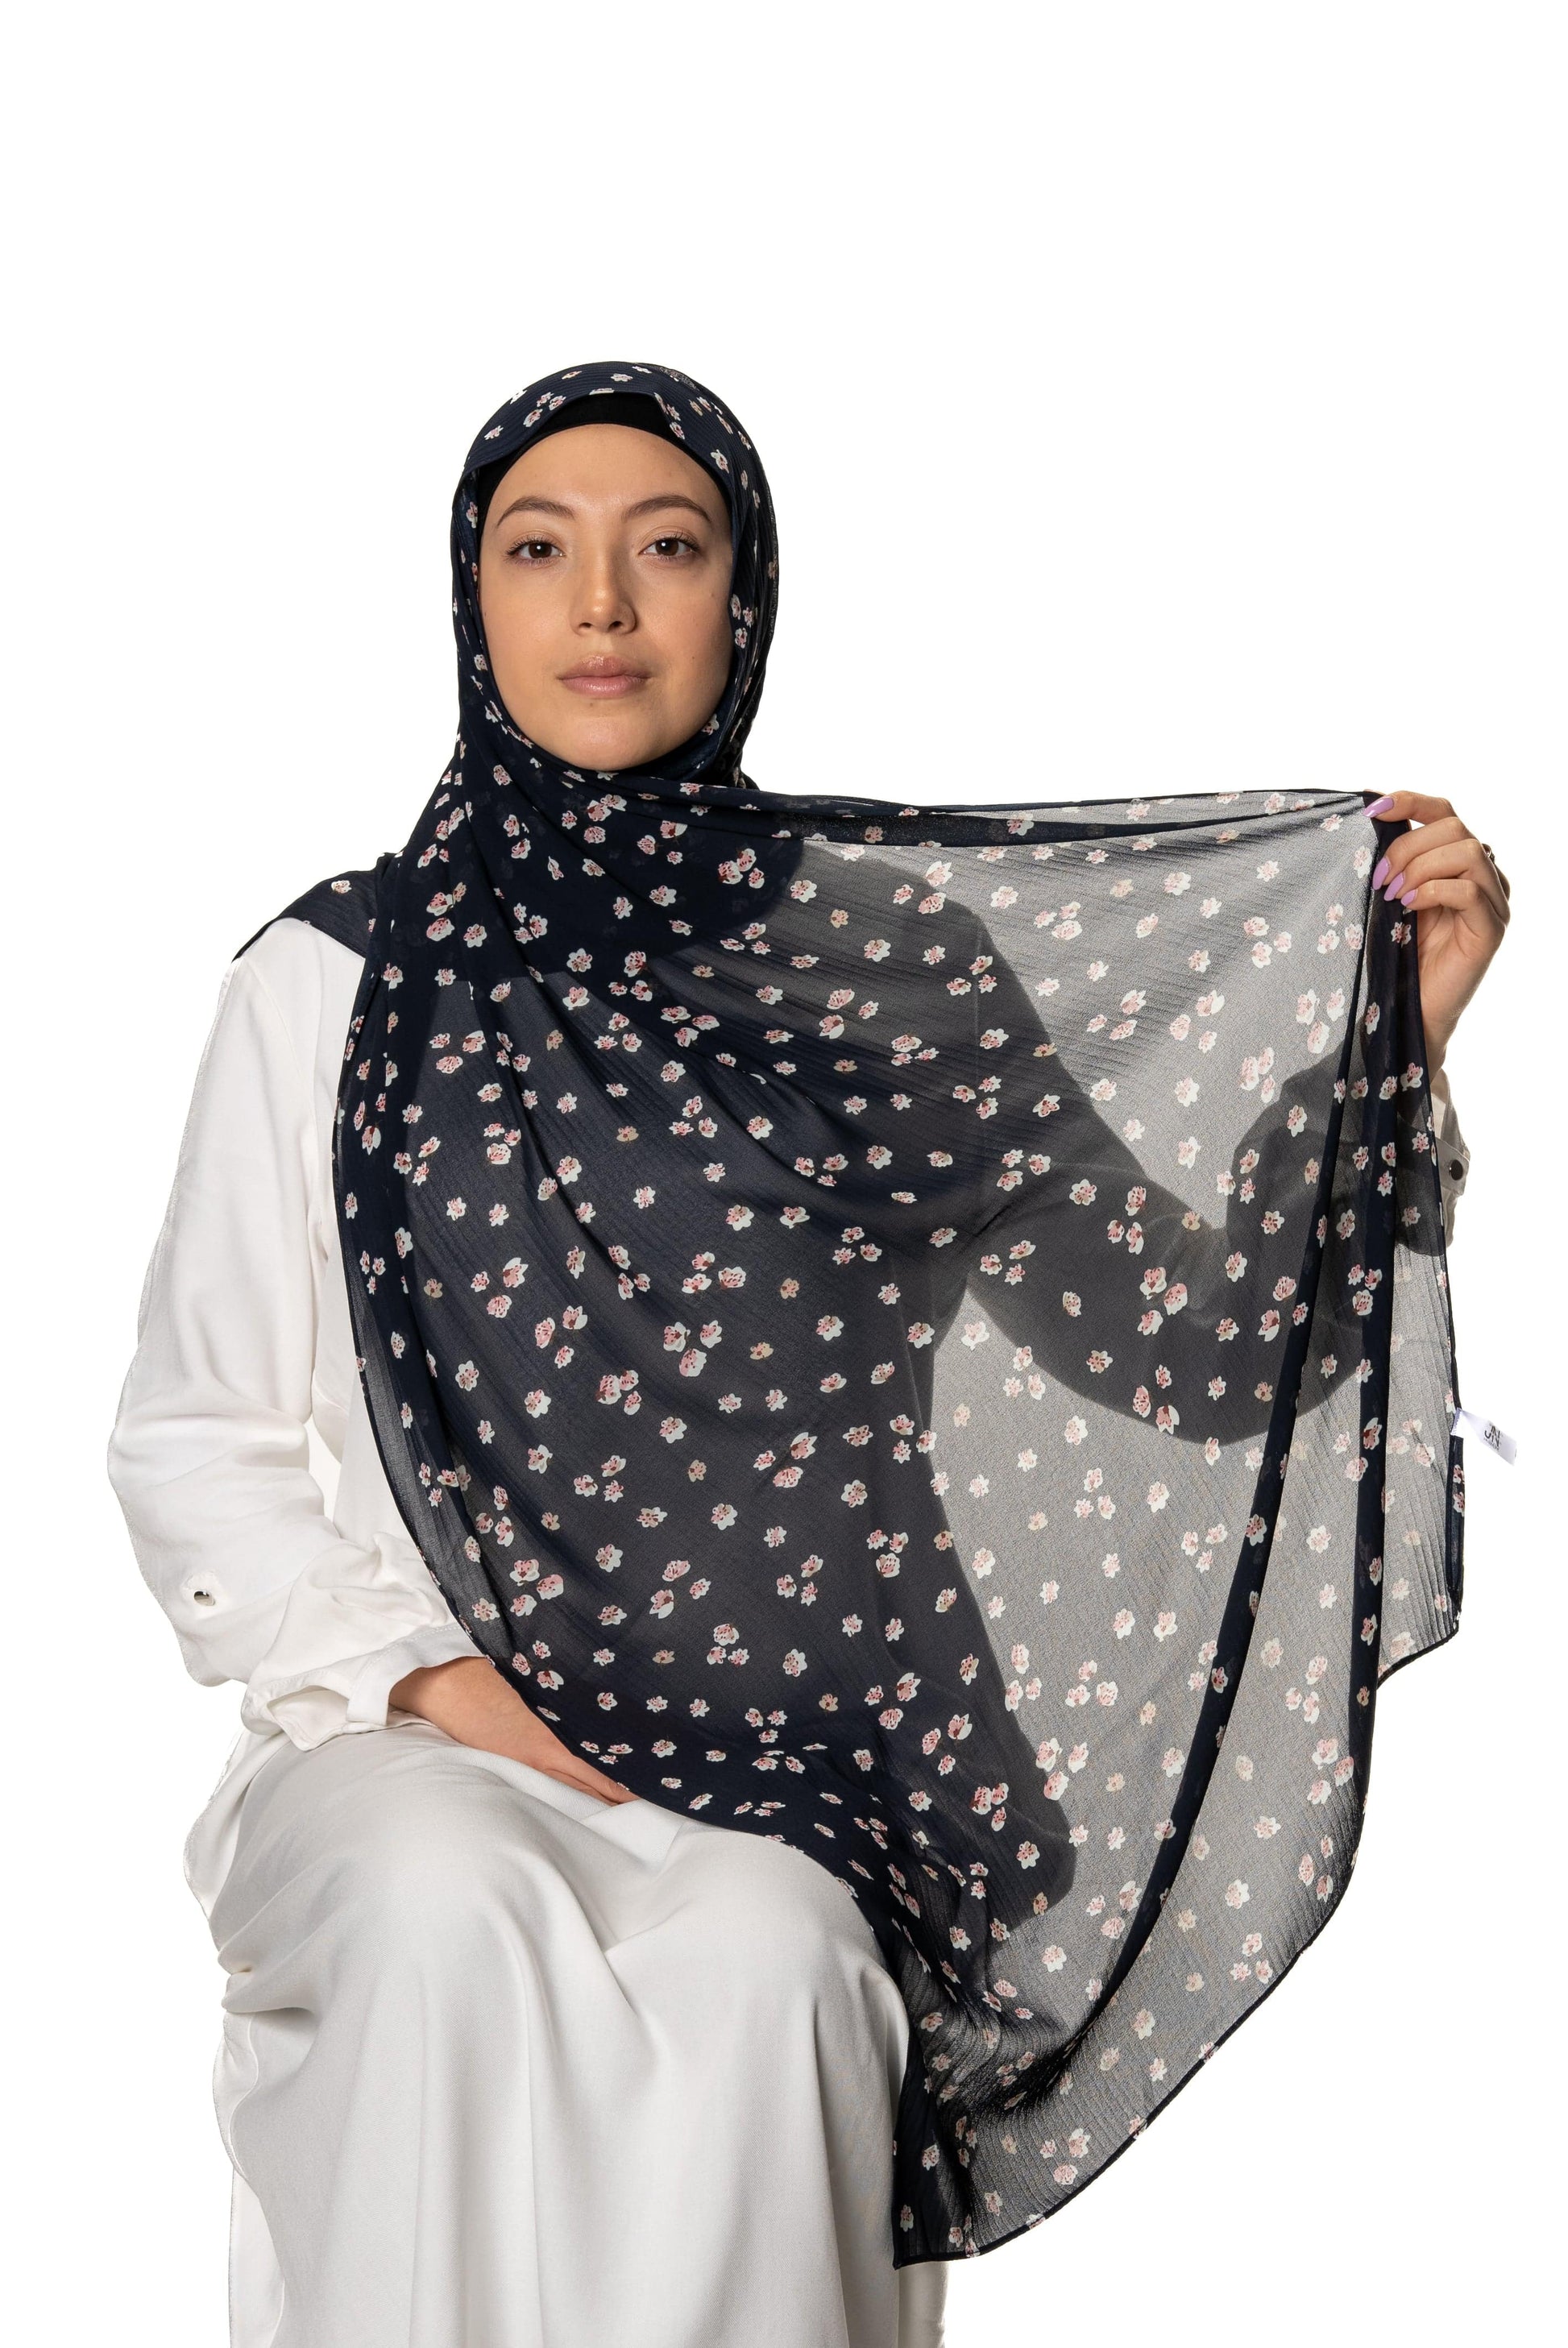 Jolie Nisa Hijab Navy Bliss Experience Luxury and Comfort with Jolie Nisa Premium Crinkle Chiffon Hijab - Non-Slip, Elegant and Breathable Hijab for Women